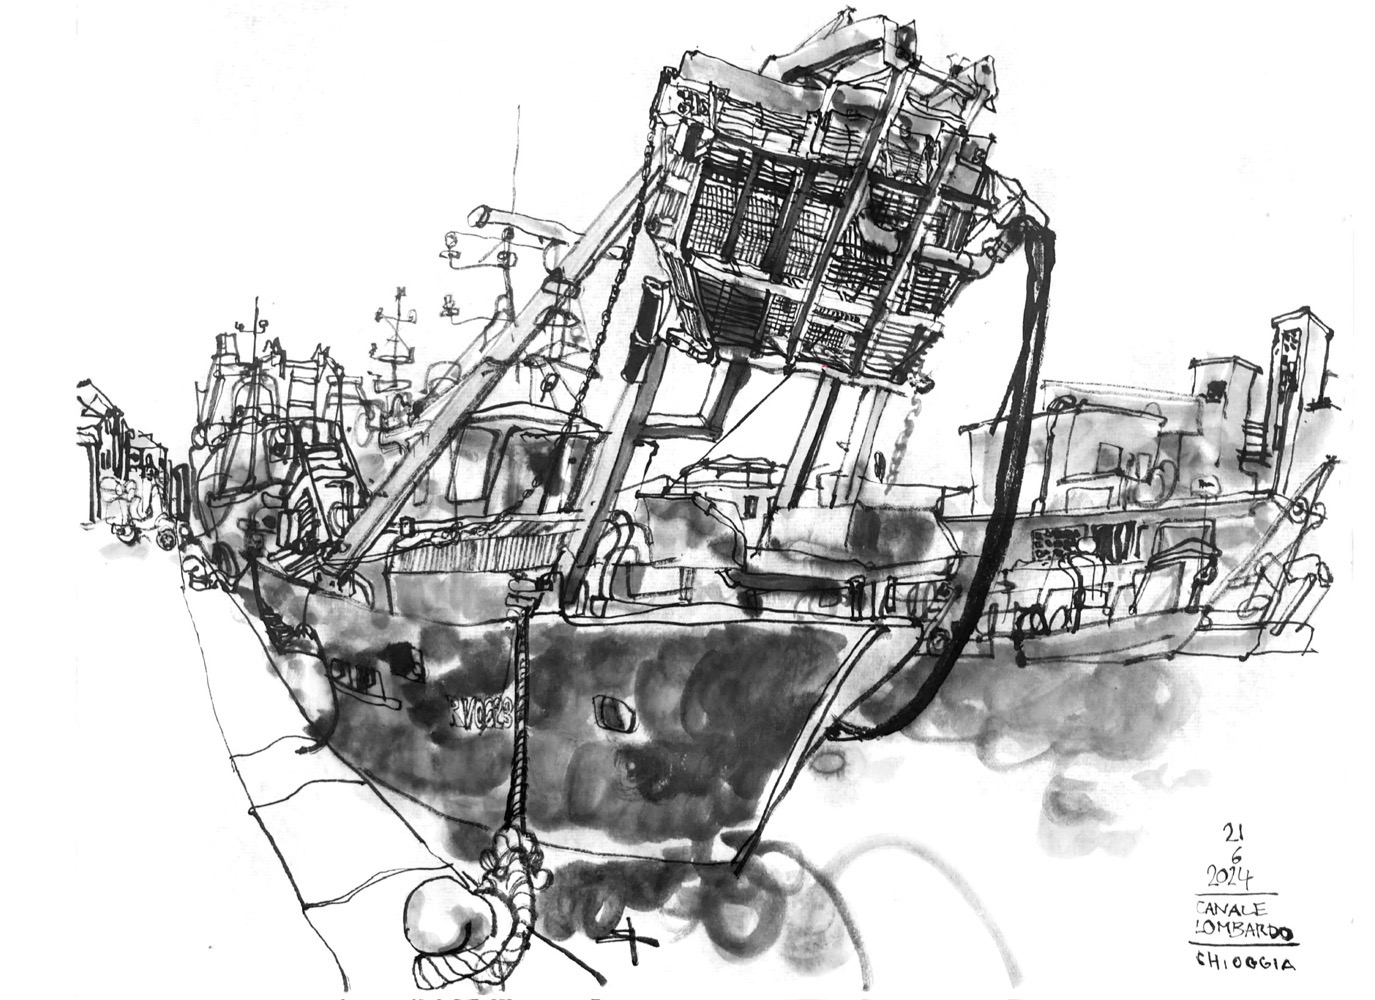 Ink drawing of a boat moored to the quay wall of a canal. Th boat, seen from the front, has a steel structure errected over the front, with some grid structure attached to it,